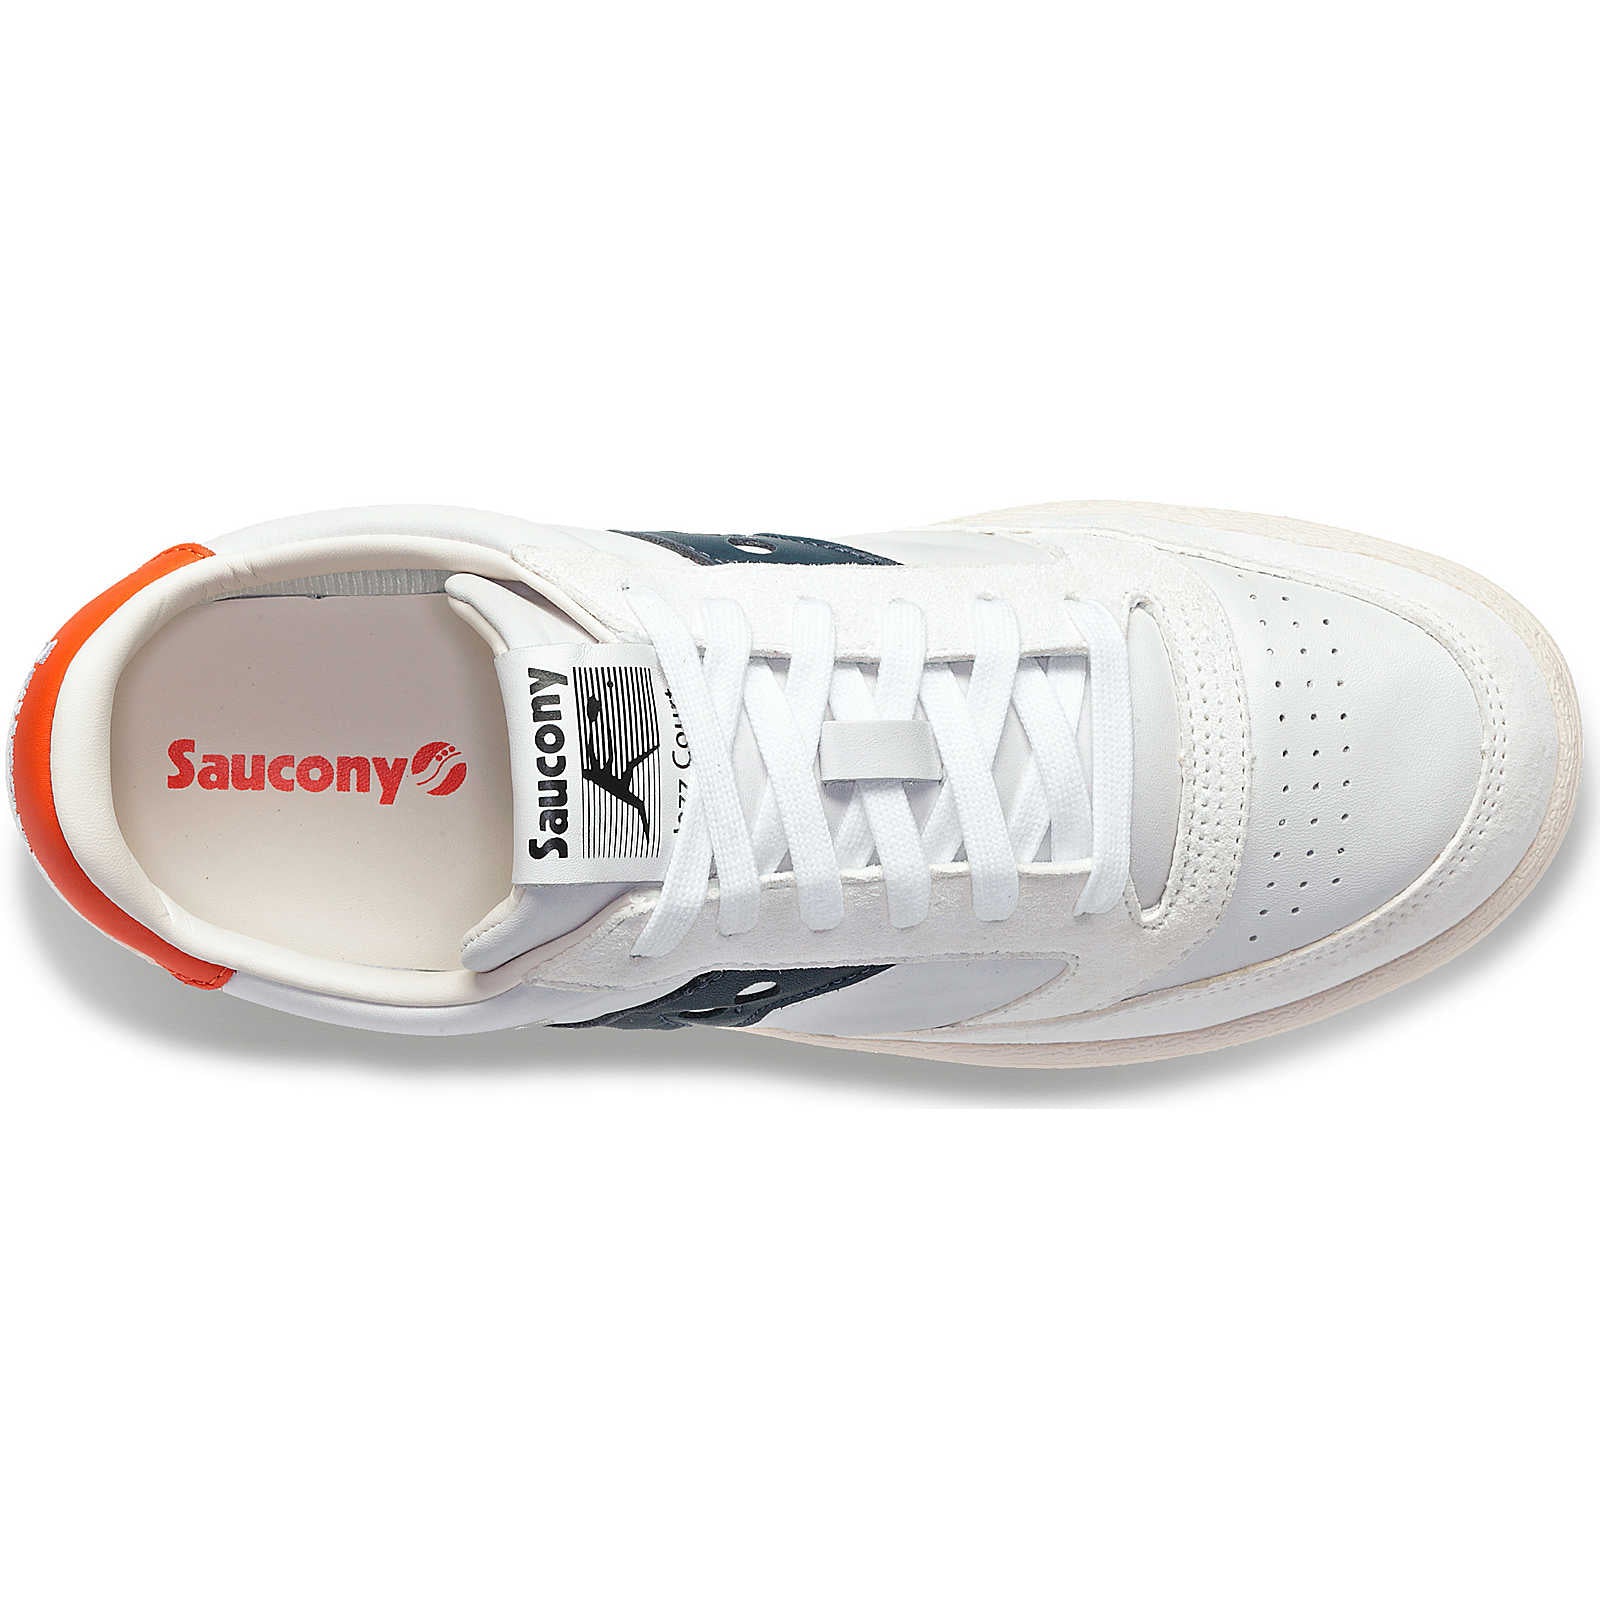 Saucony Mens Jazz Court Trainers - White / Blue